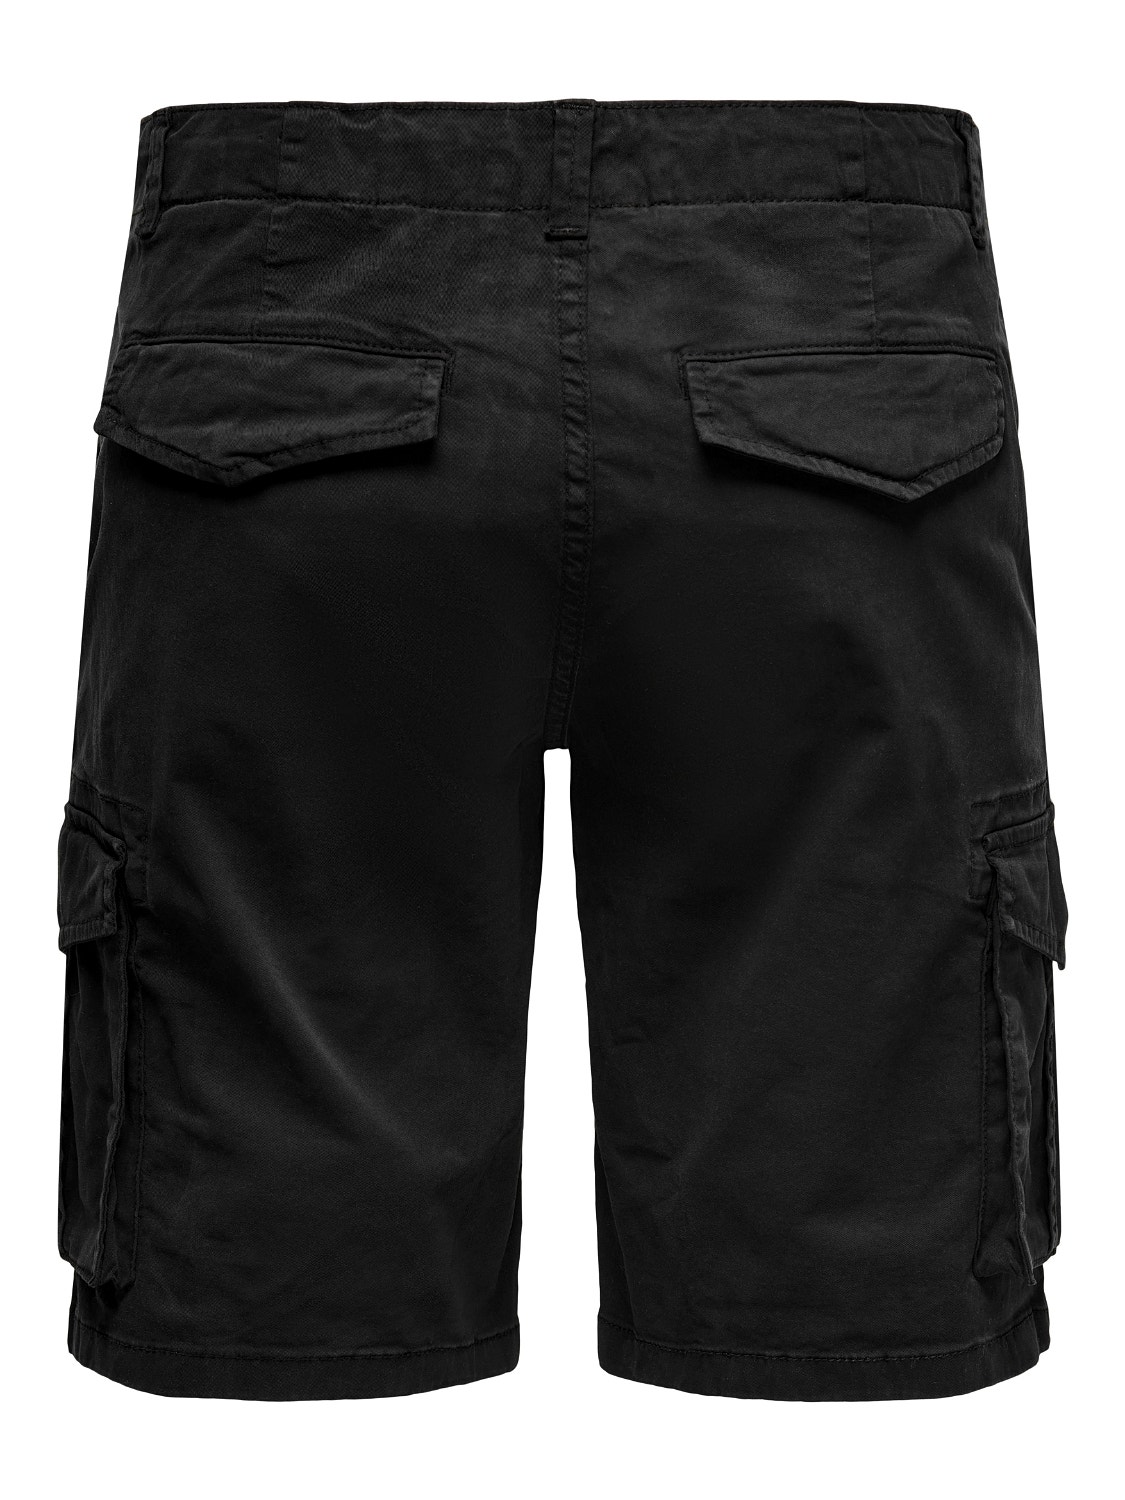 ONLY & SONS Shorts cargo Regular Fit -Black - 22021459